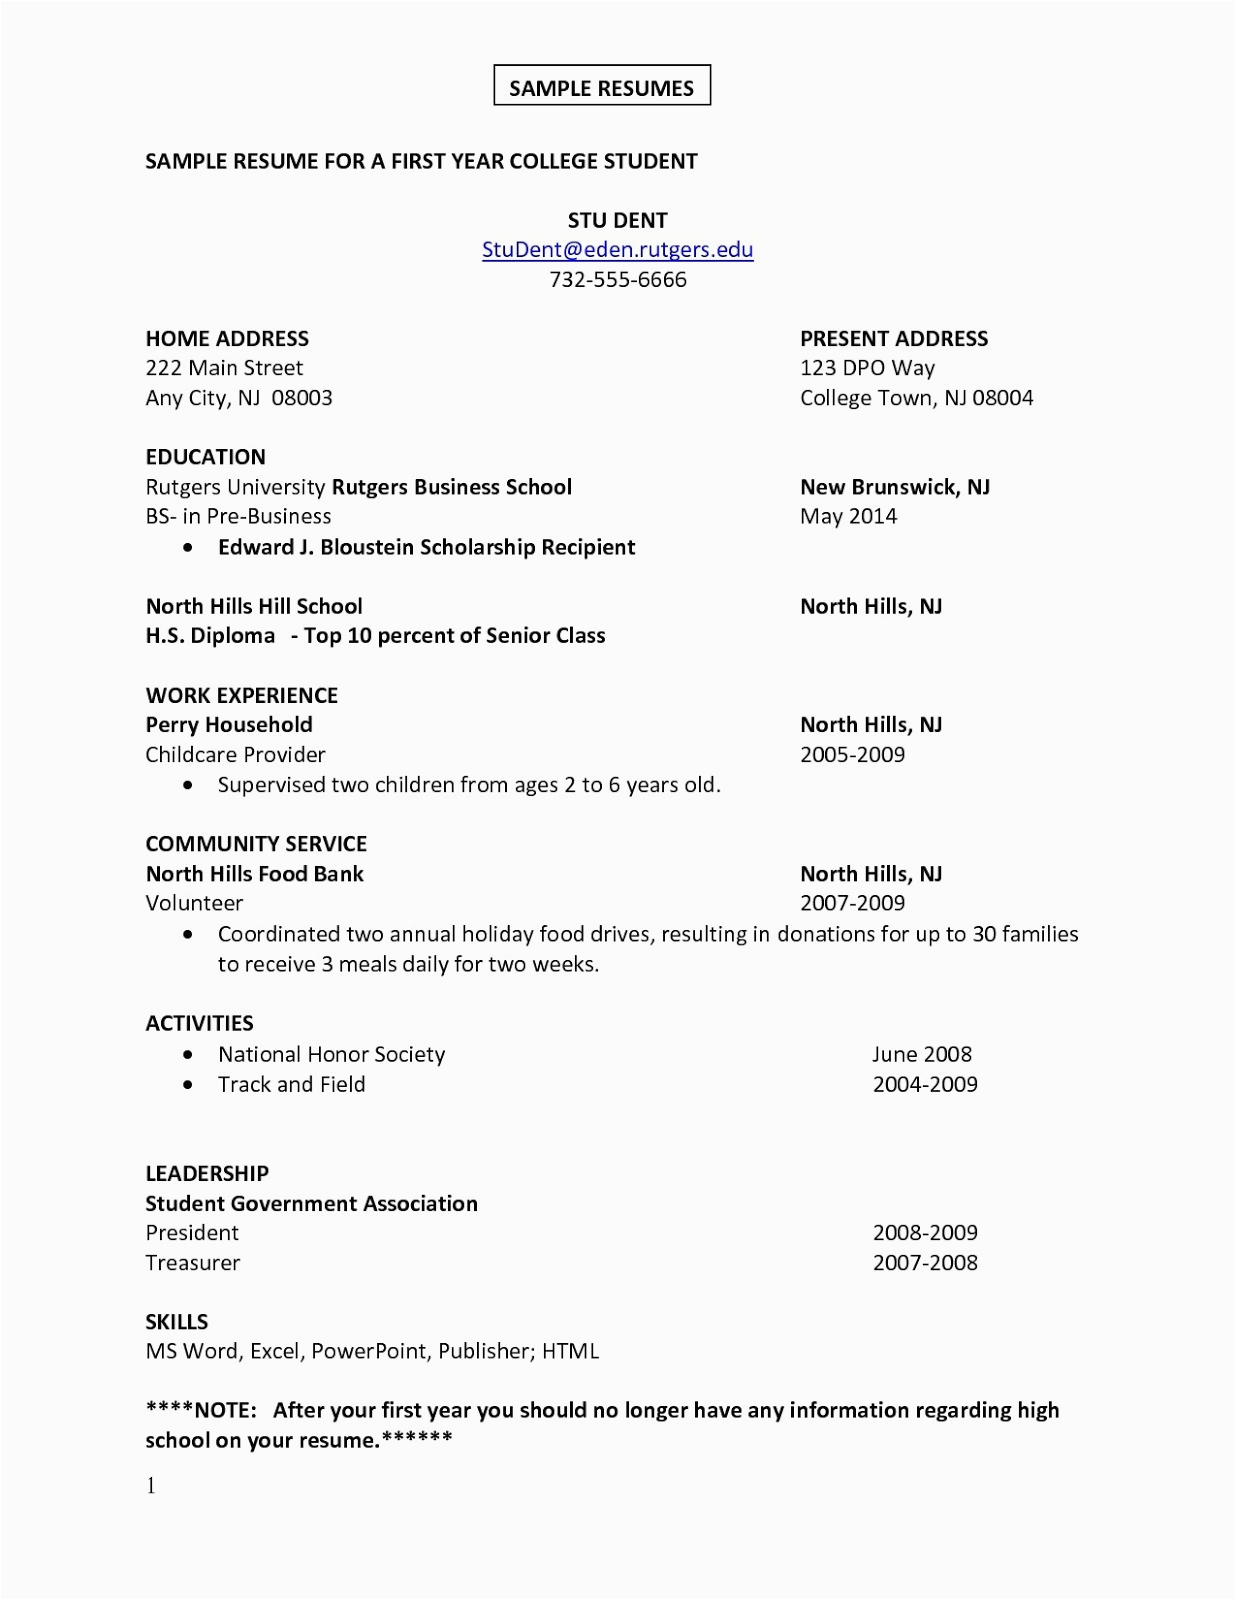 Resume Template for Students First Job First Job Sample Resume